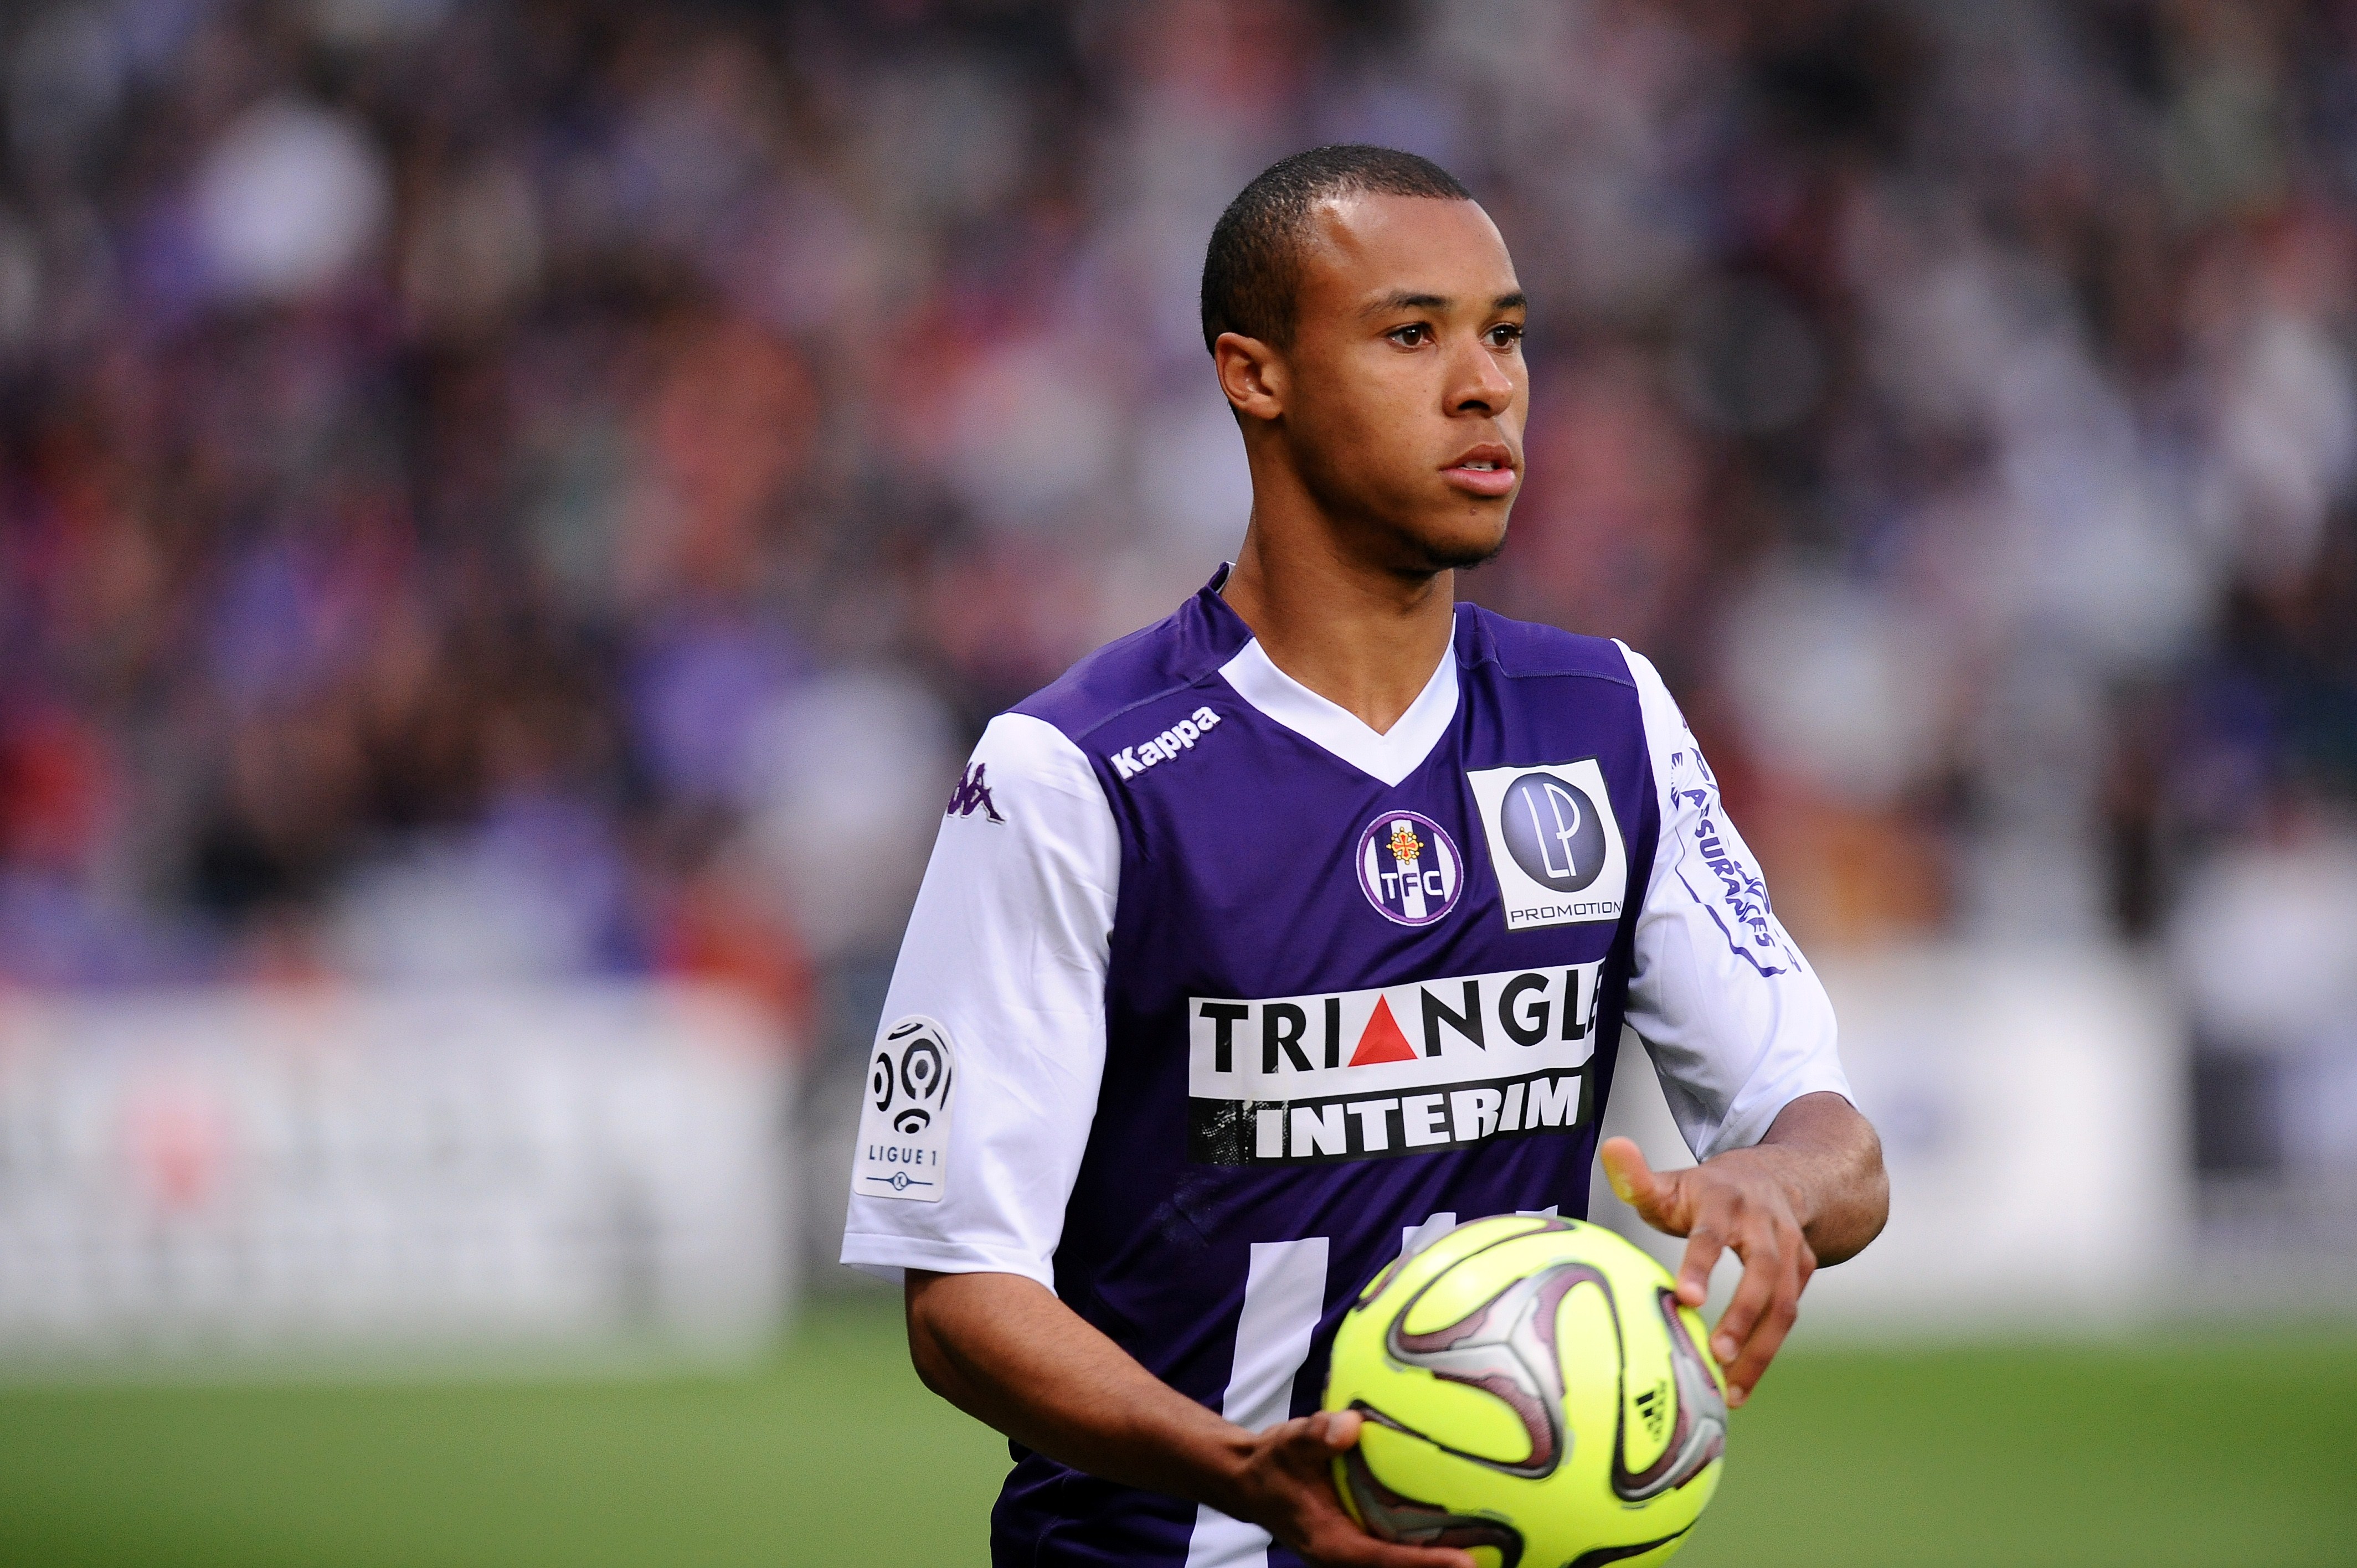 Toulouse's defender Marcel Tisserand holds the ball the French L1 football match Toulouse vs Guigamp on December 20, 2015 at the Municipal Stadium in Toulouse.AFP PHOTO/ REMY GABALDA        (Photo credit should read REMY GABALDA/AFP/Getty Images)